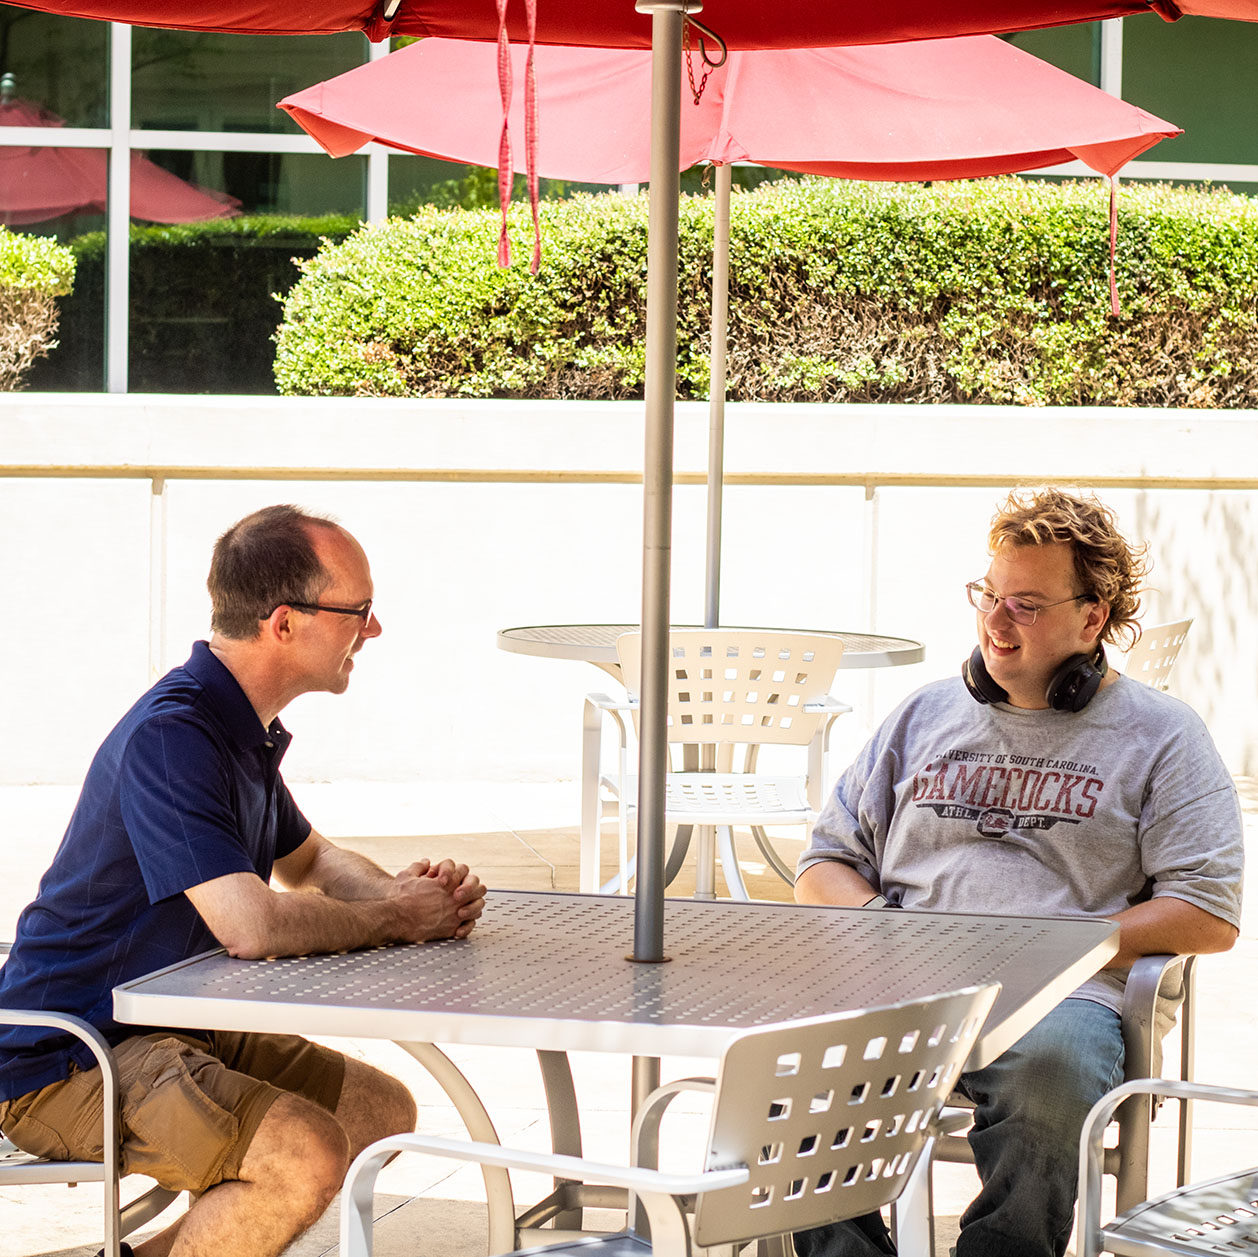 A staff member leans over a courtyard table to speak with a student.